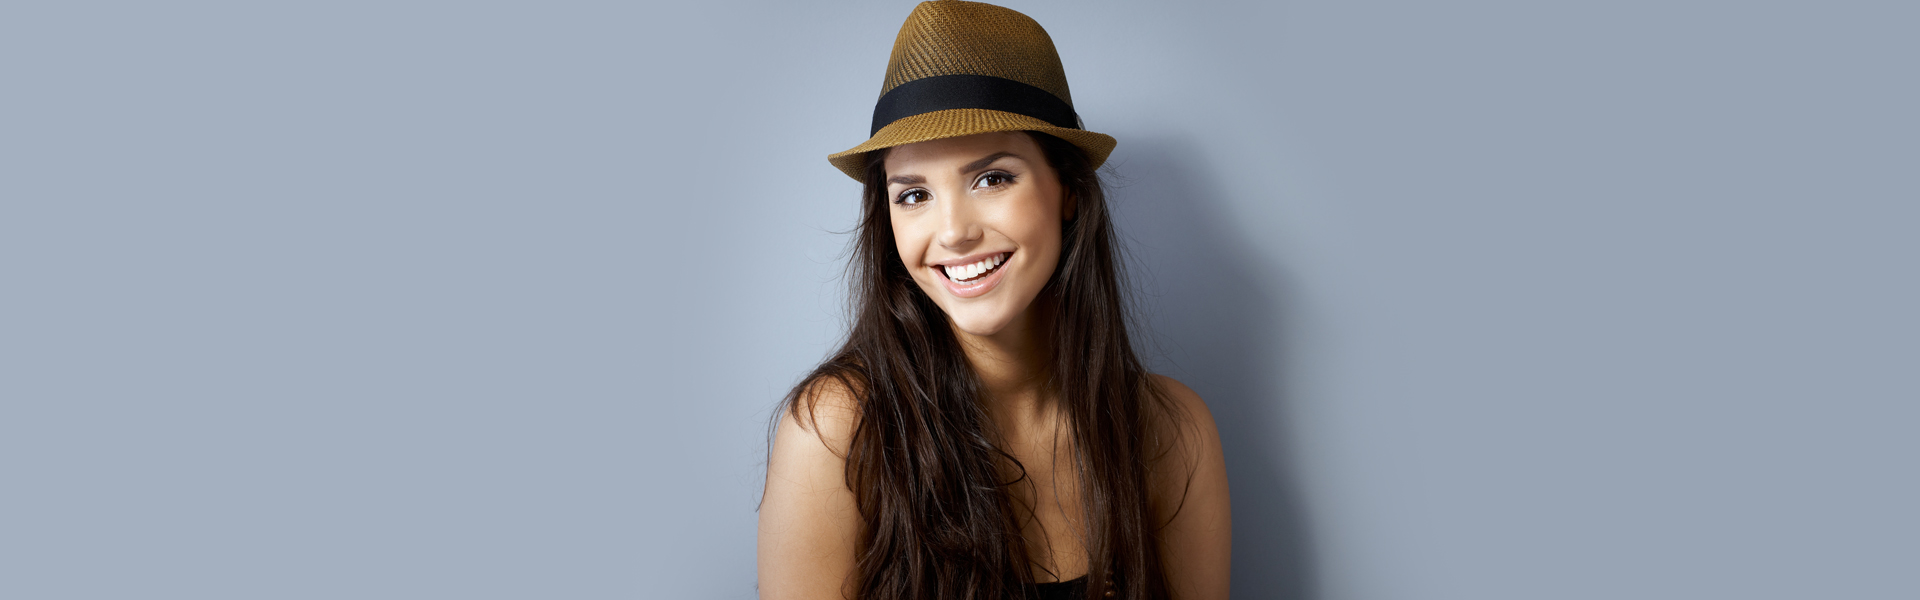 Enhancing Smiles with Porcelain and Tooth Colored Restorations in Manalapan, NJ